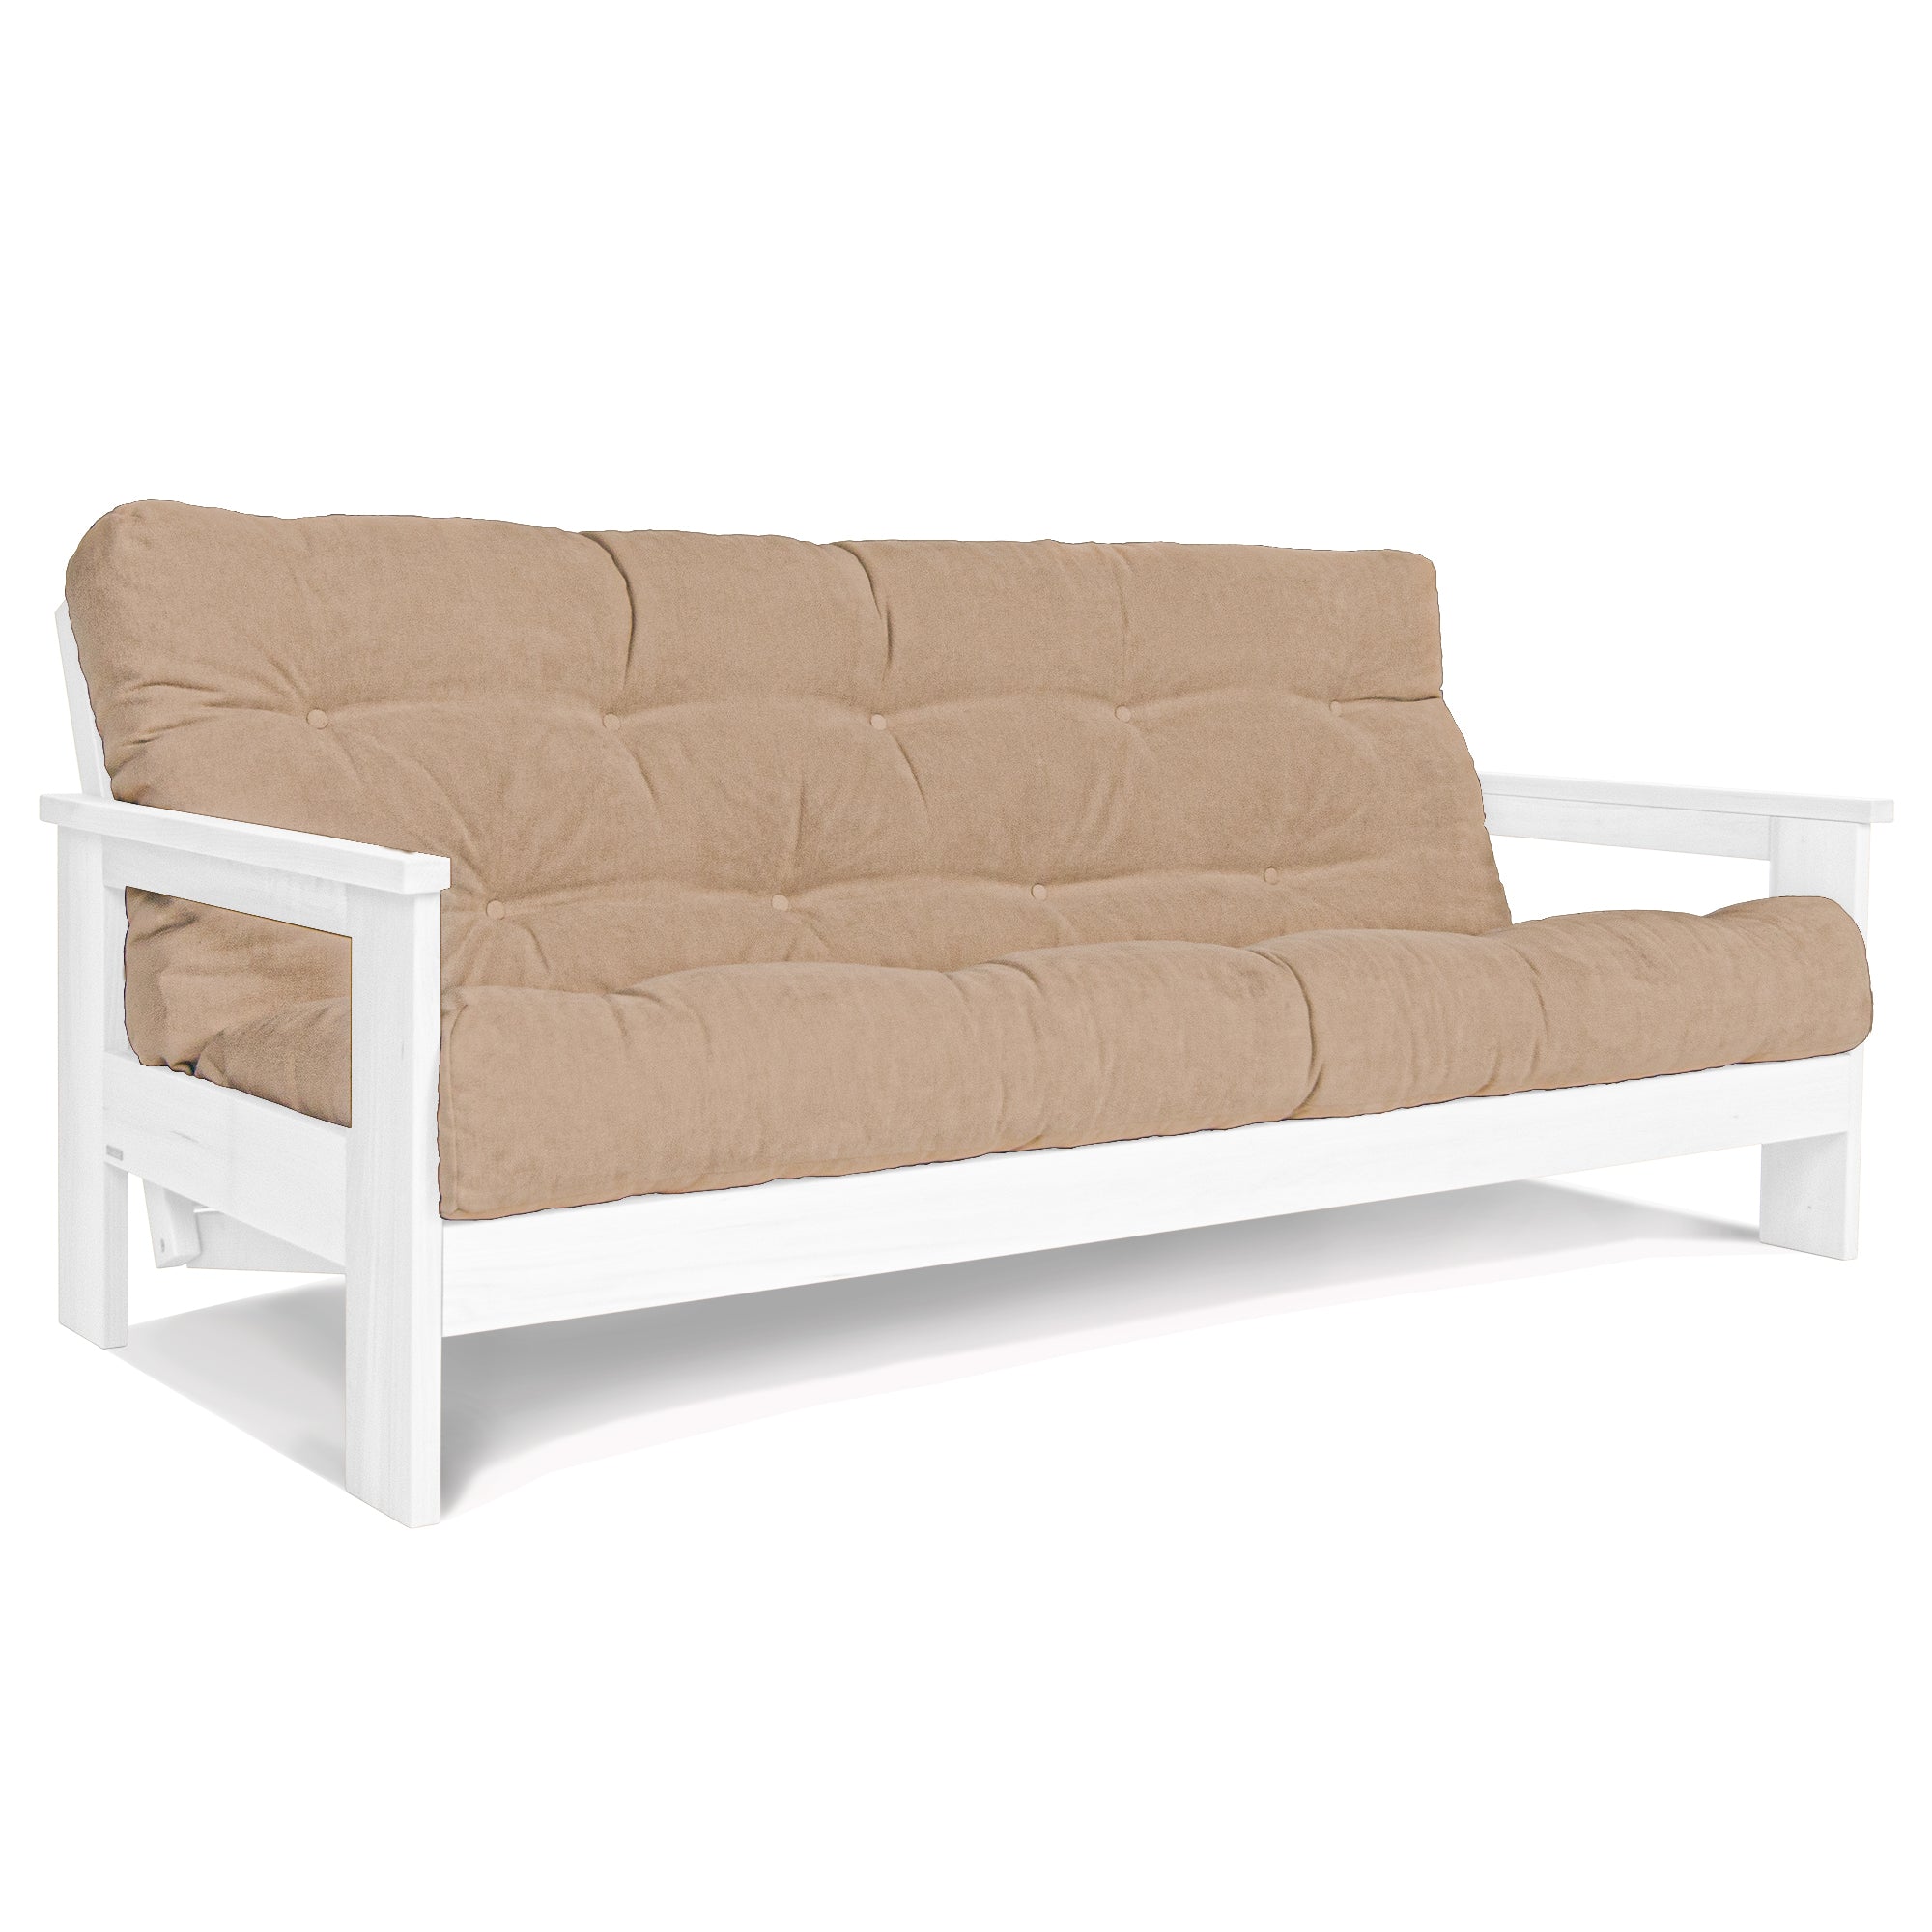 MEXICO Folding Sofa Bed-Beech Wood Frame White-beige fabric colourMEXICO Folding Sofa Bed, Beech Wood Frame, White Colour-Beige Fabric